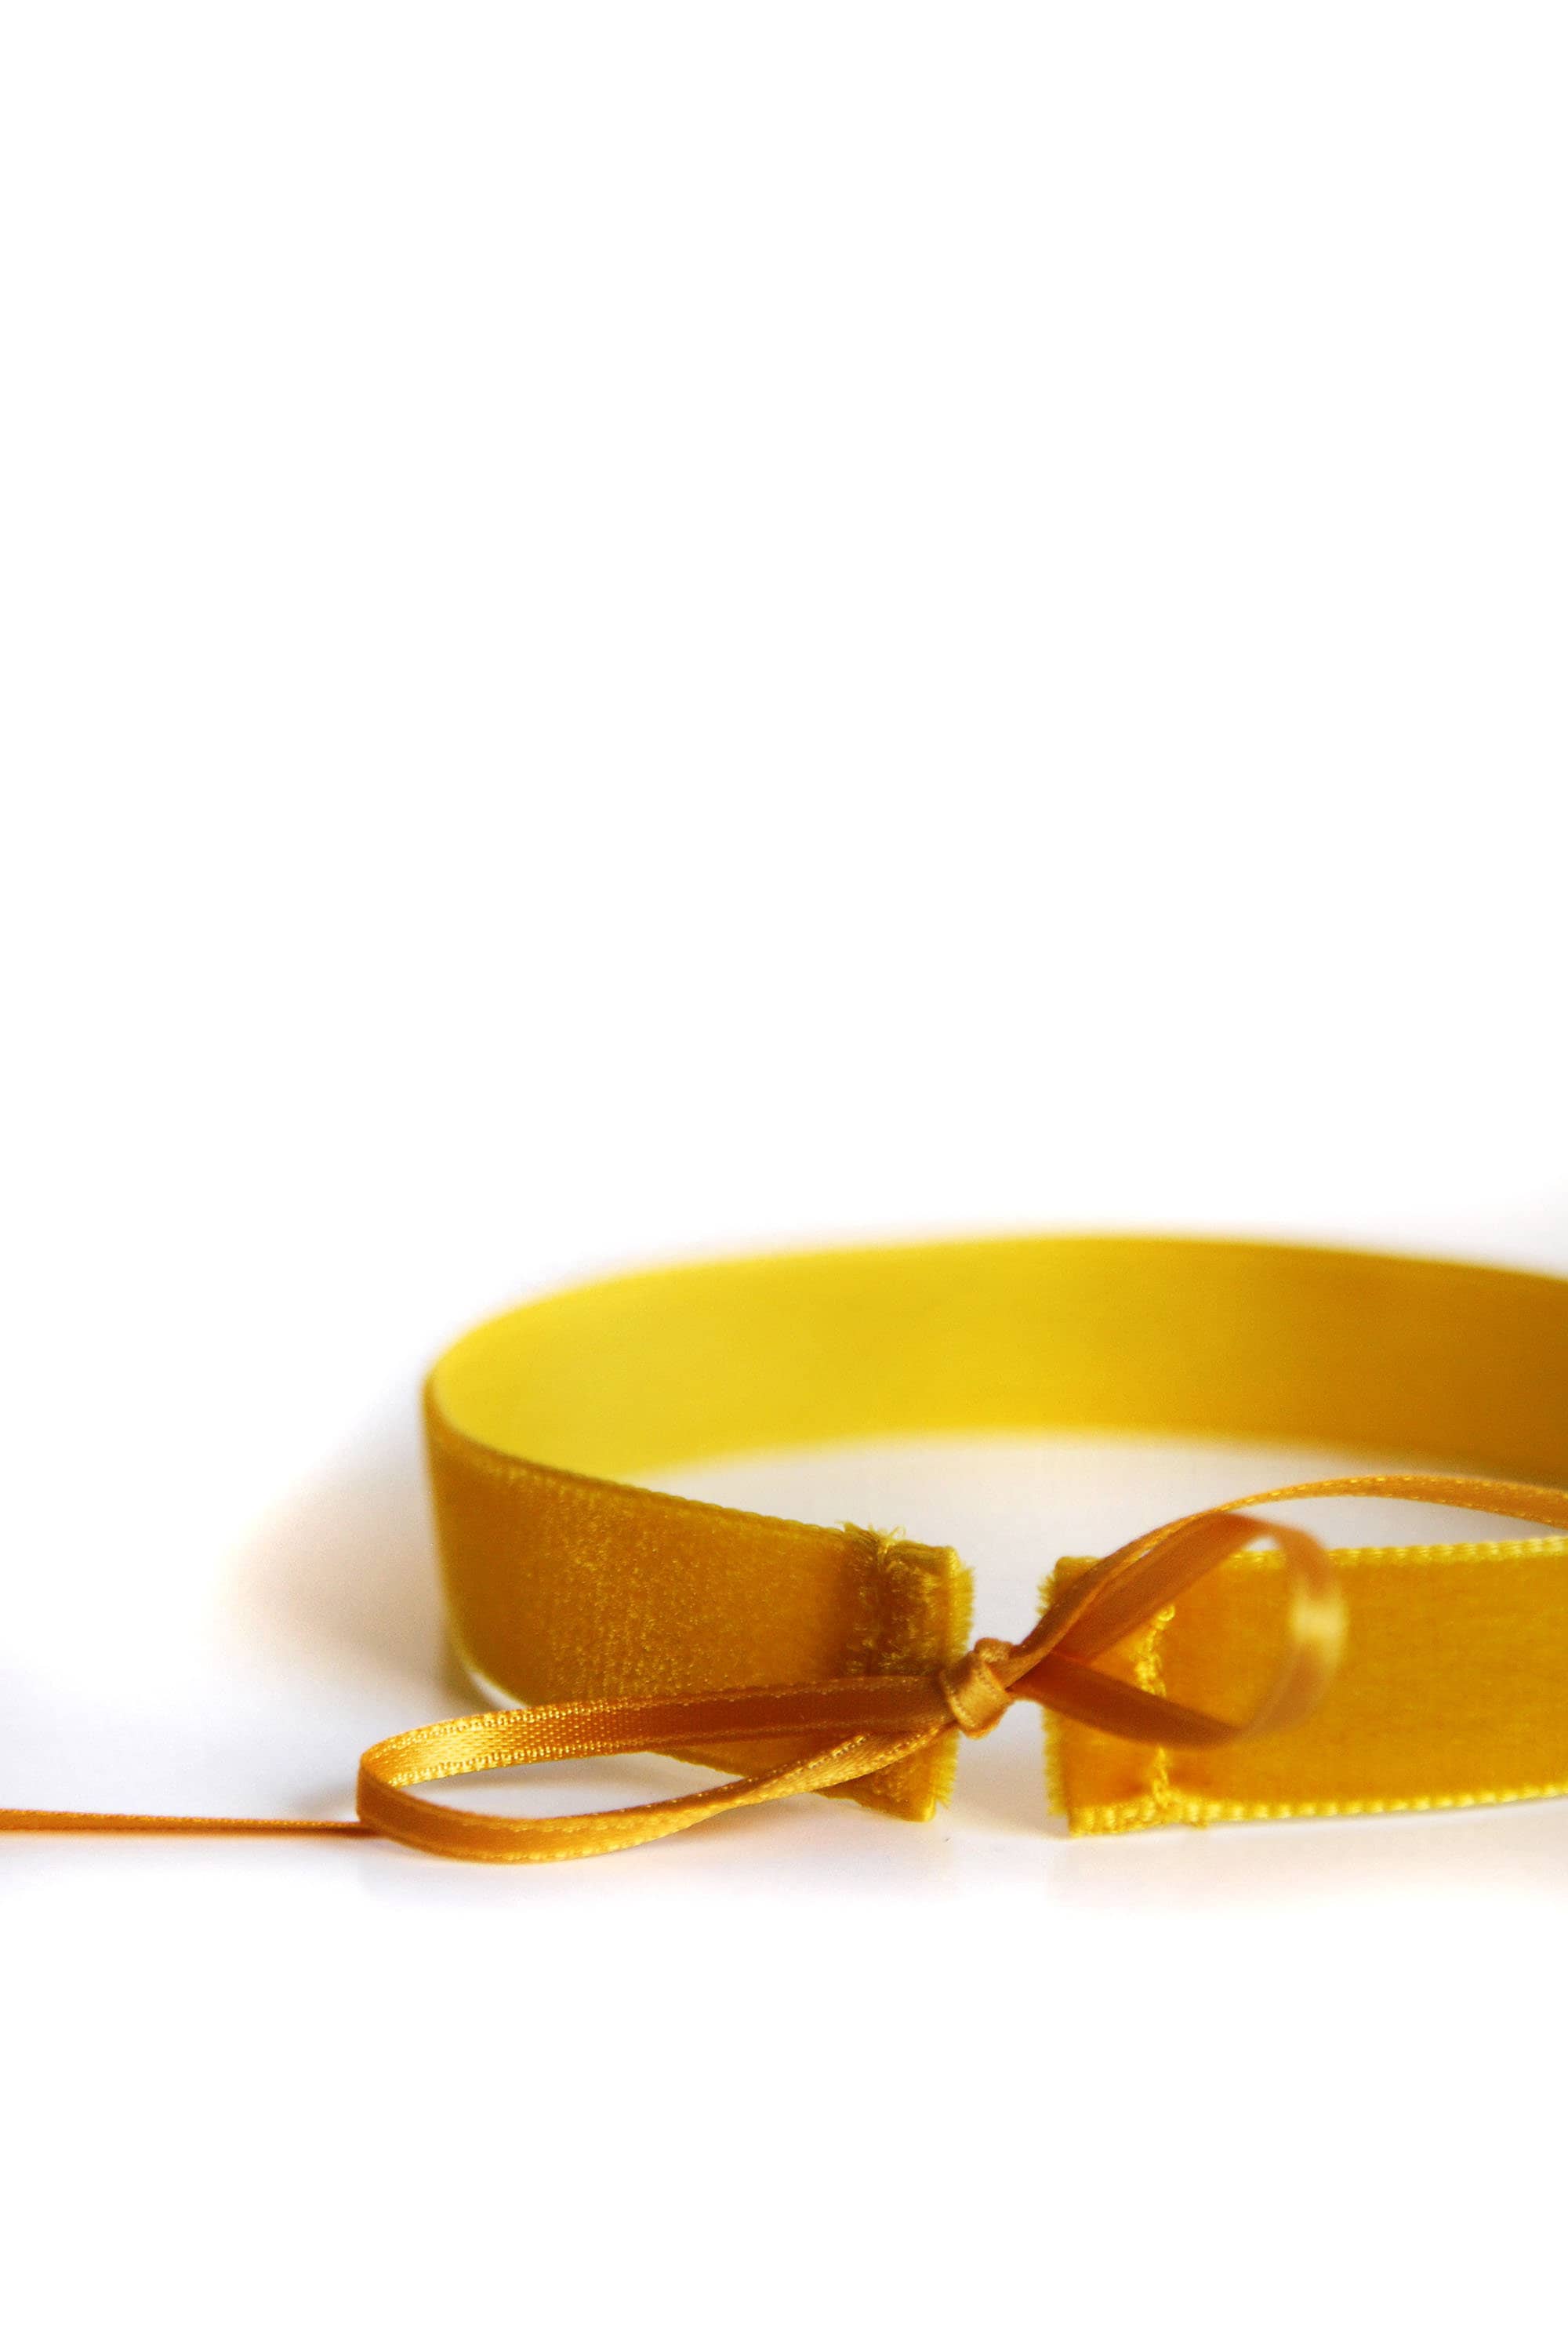 Luscious Double Faced Satin Ribbon Holiday Decorating Yellow Gold